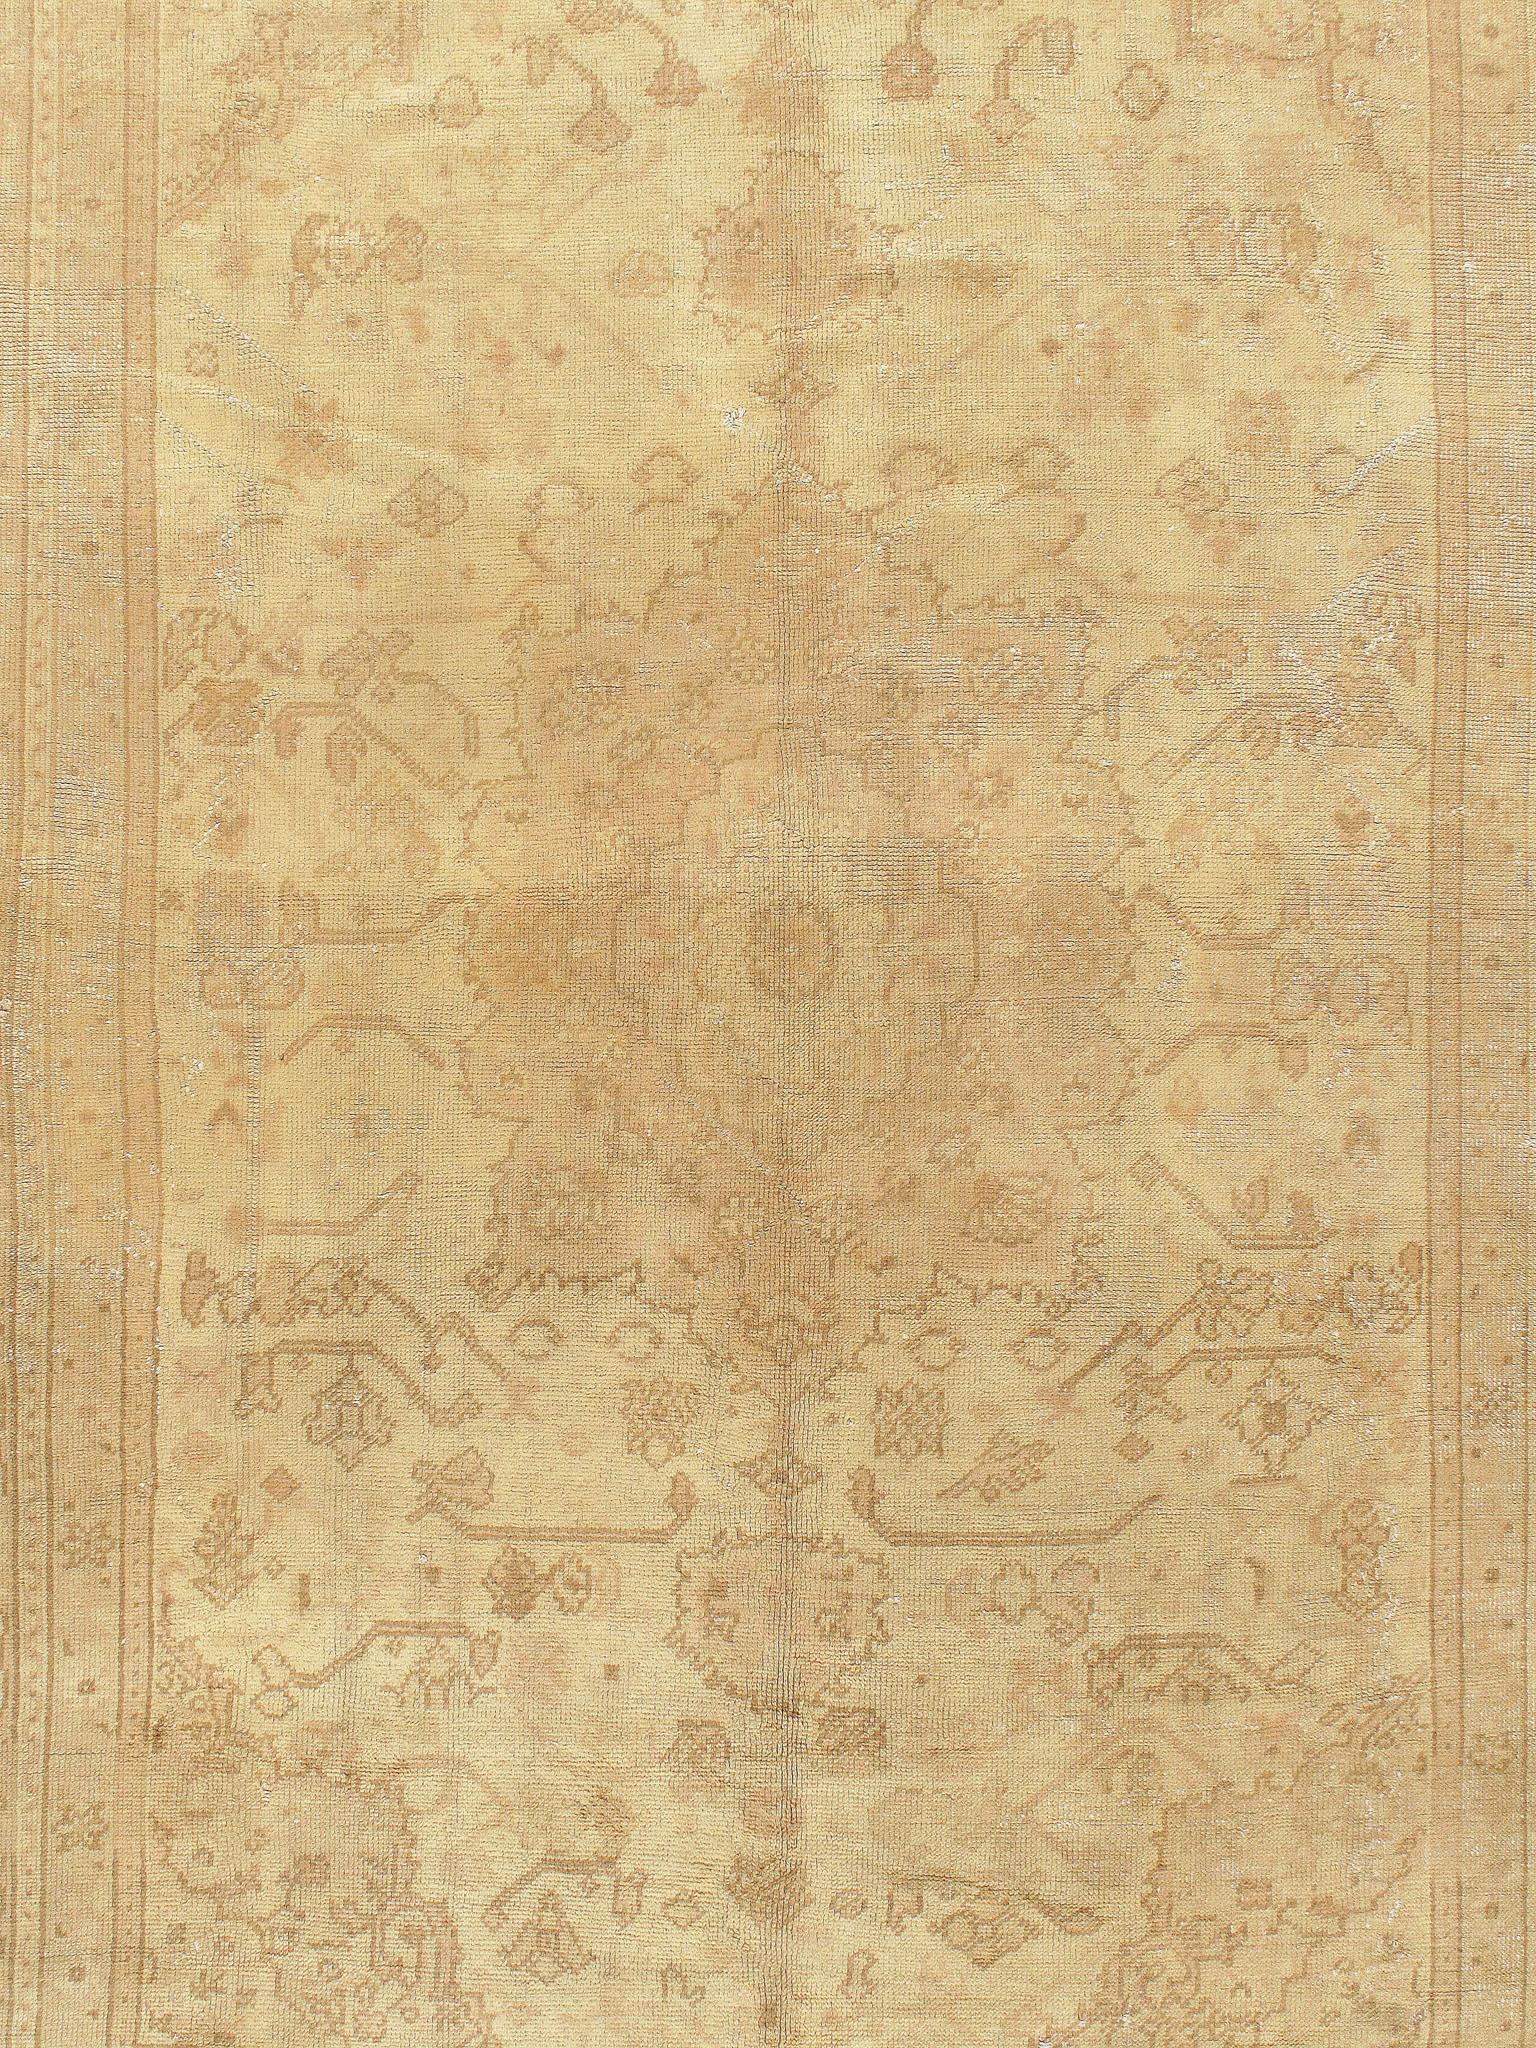 Turkish Antique Shabby Chic Oushak Rug, circa 1920 8'11 x 11'10 For Sale